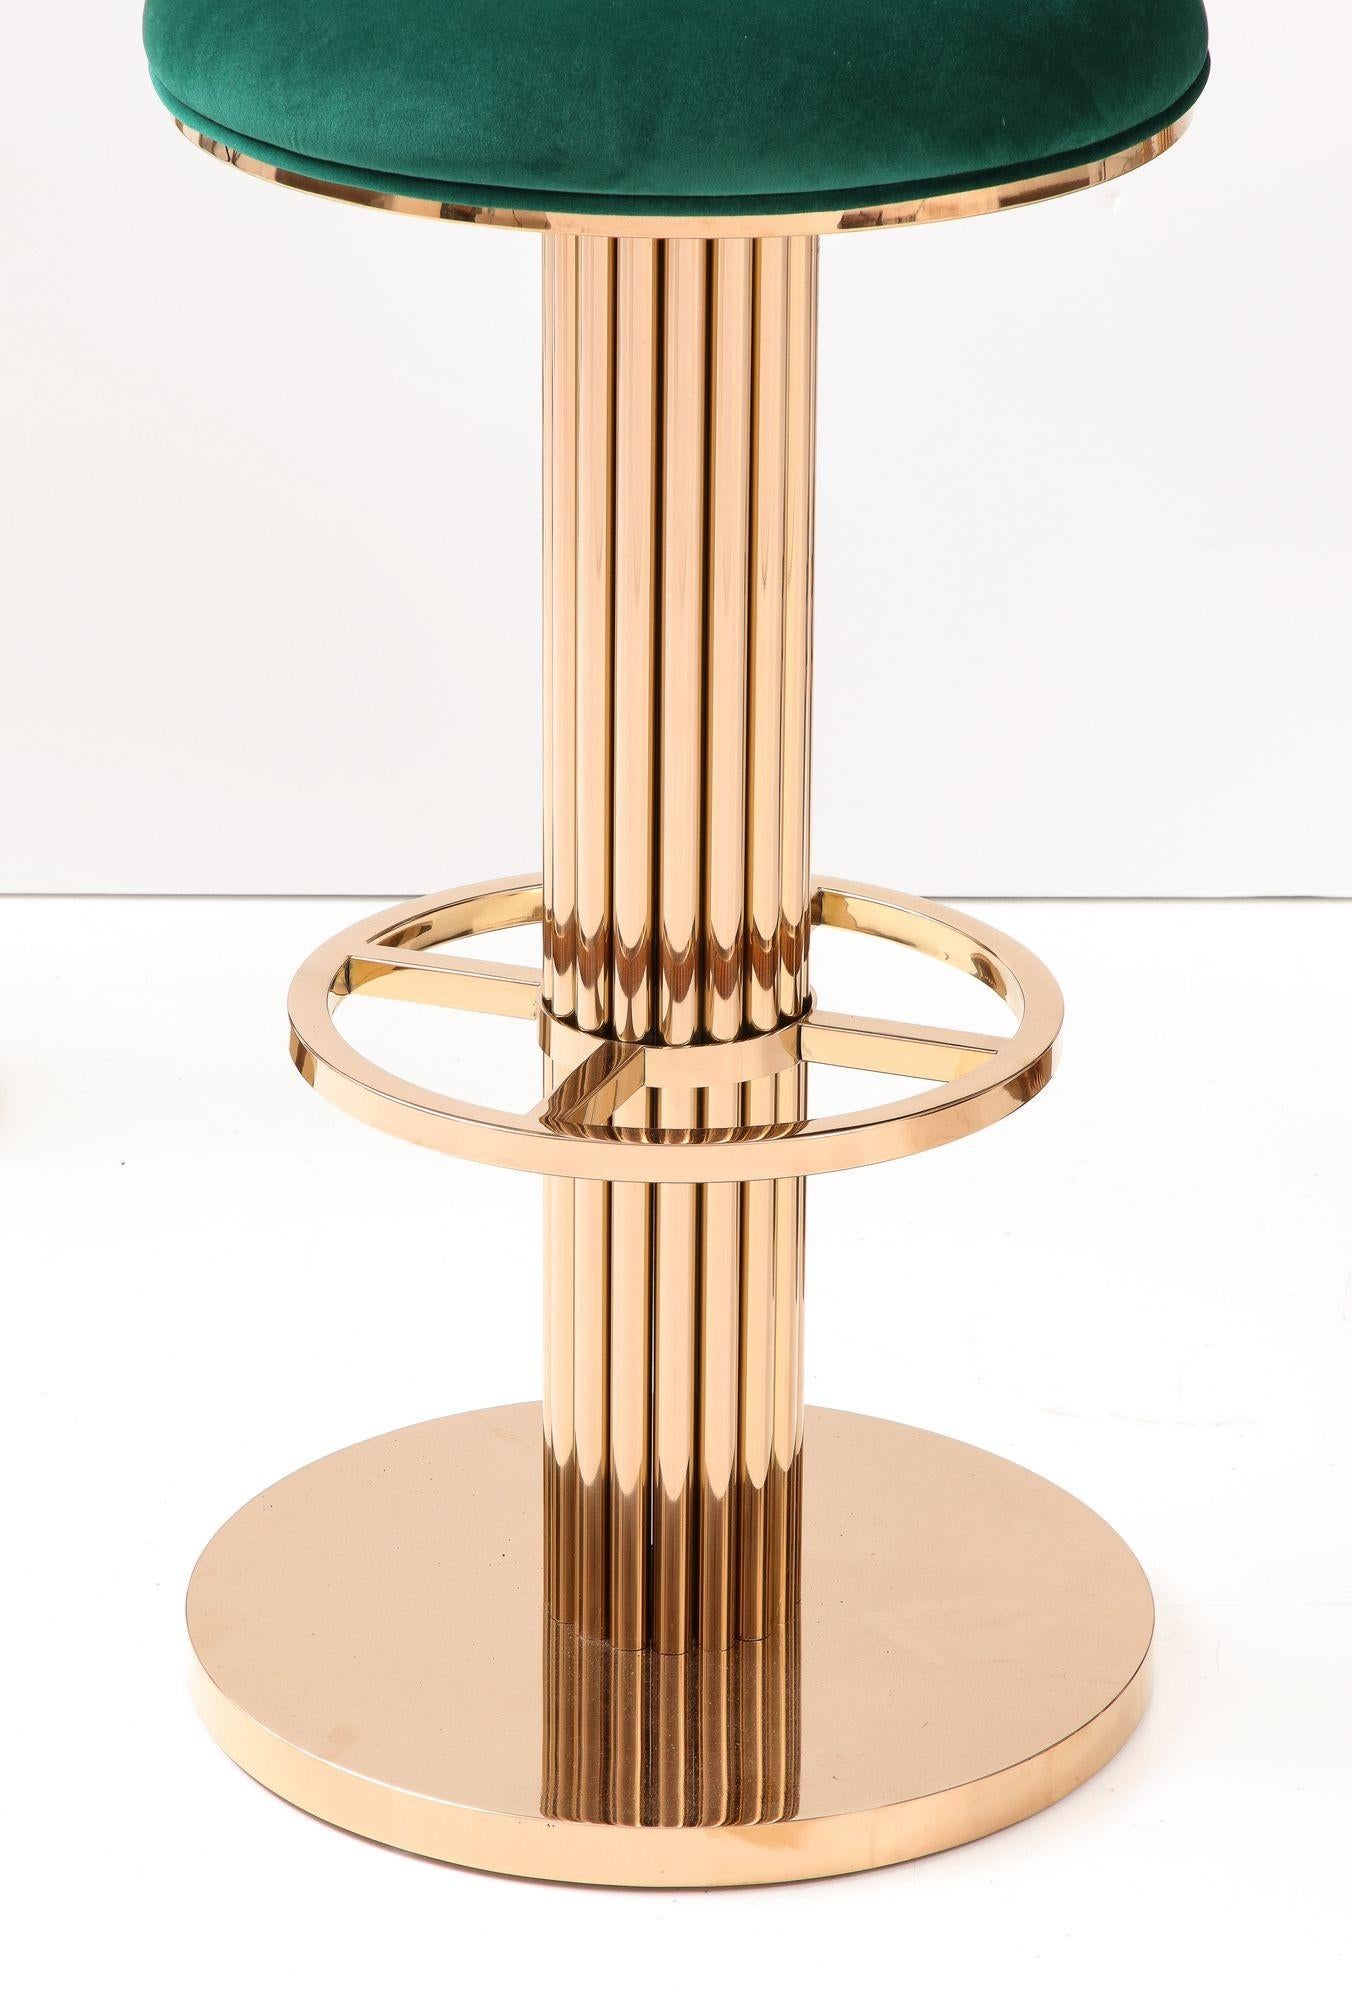 Contemporary Set of Four Rose Gold and Emerald Barstools in the Design For Leisure Style